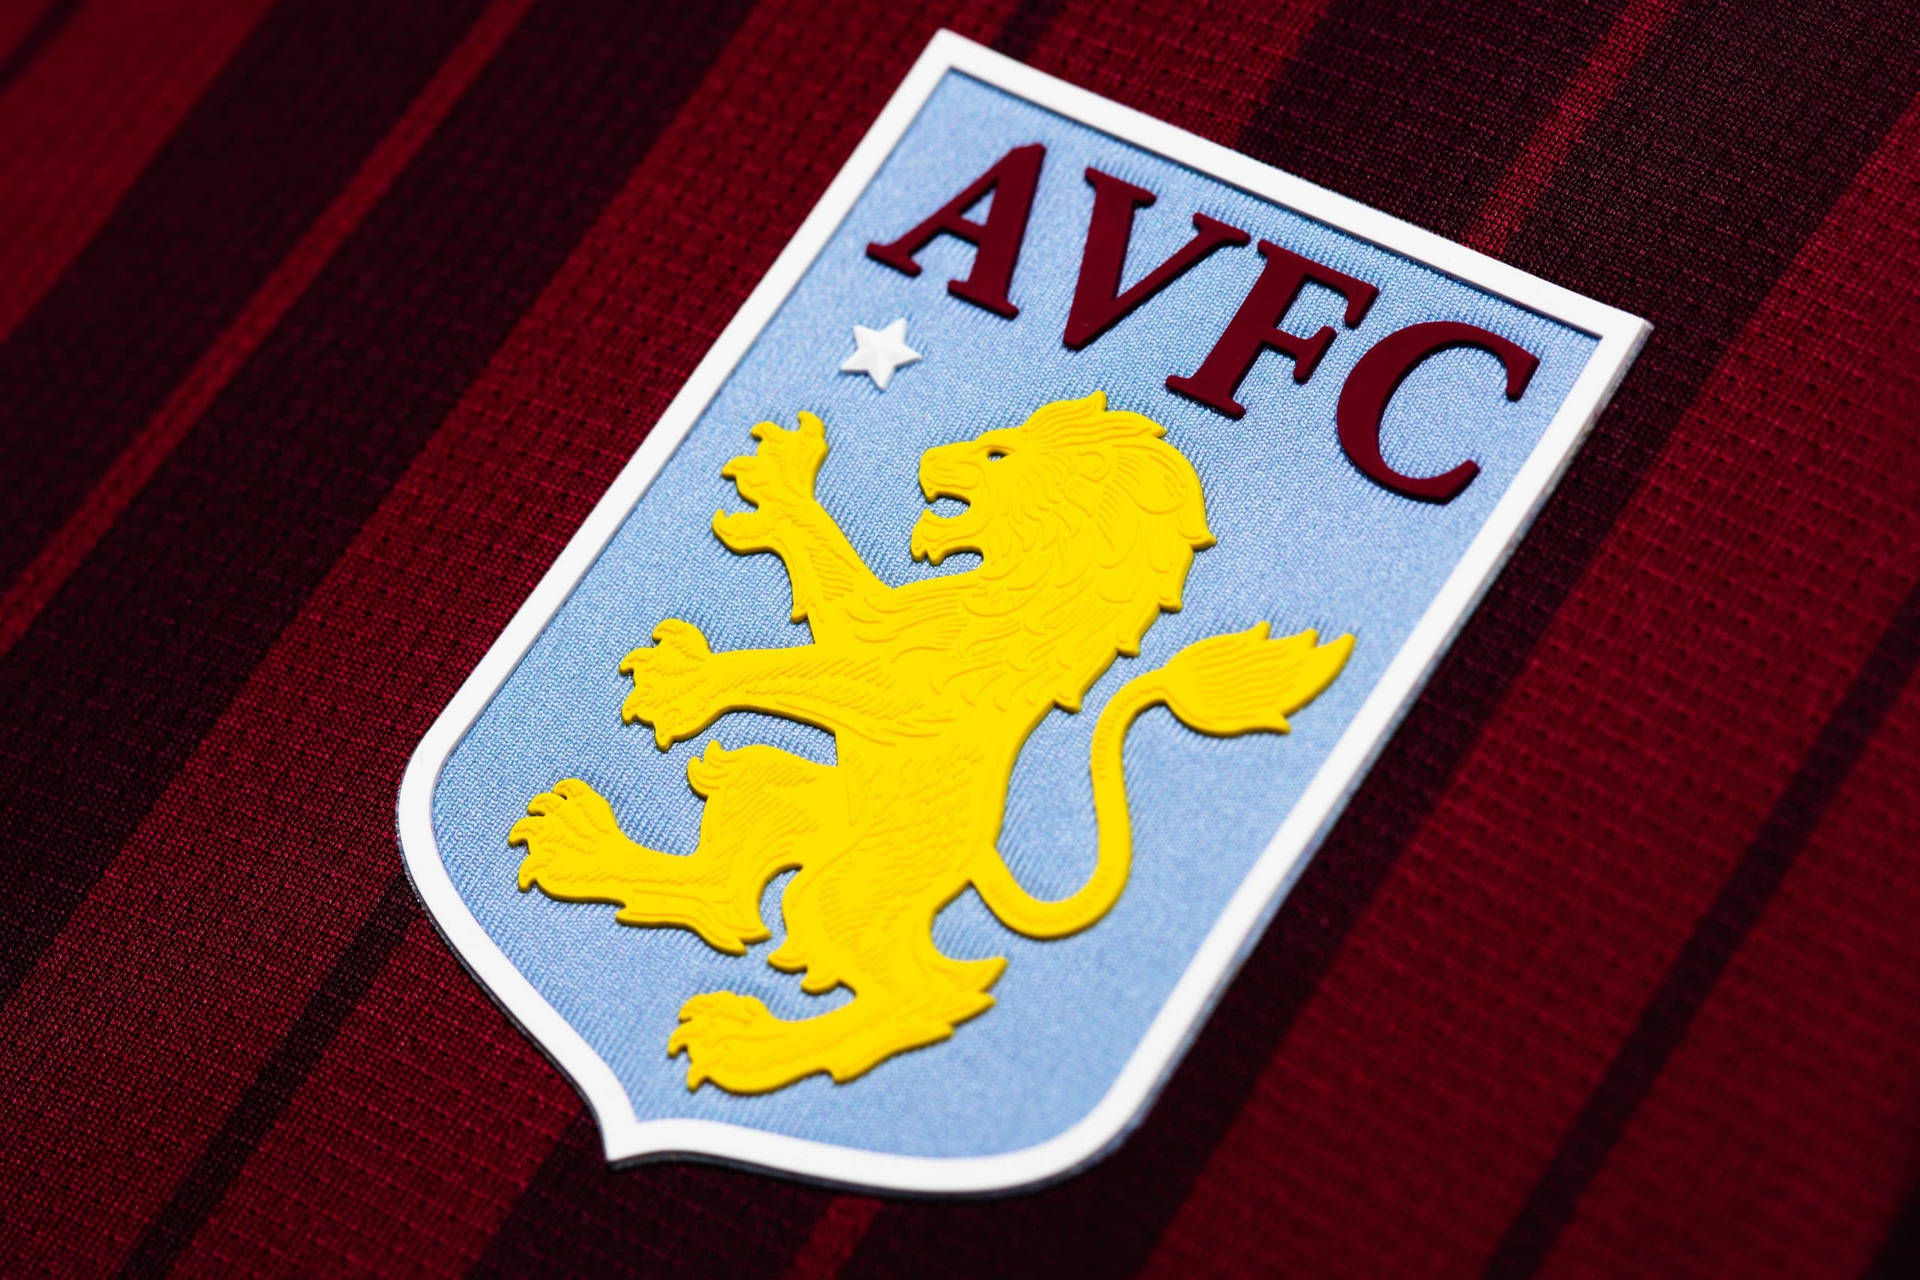 Aston Villa Official Team Kit And Logo Background